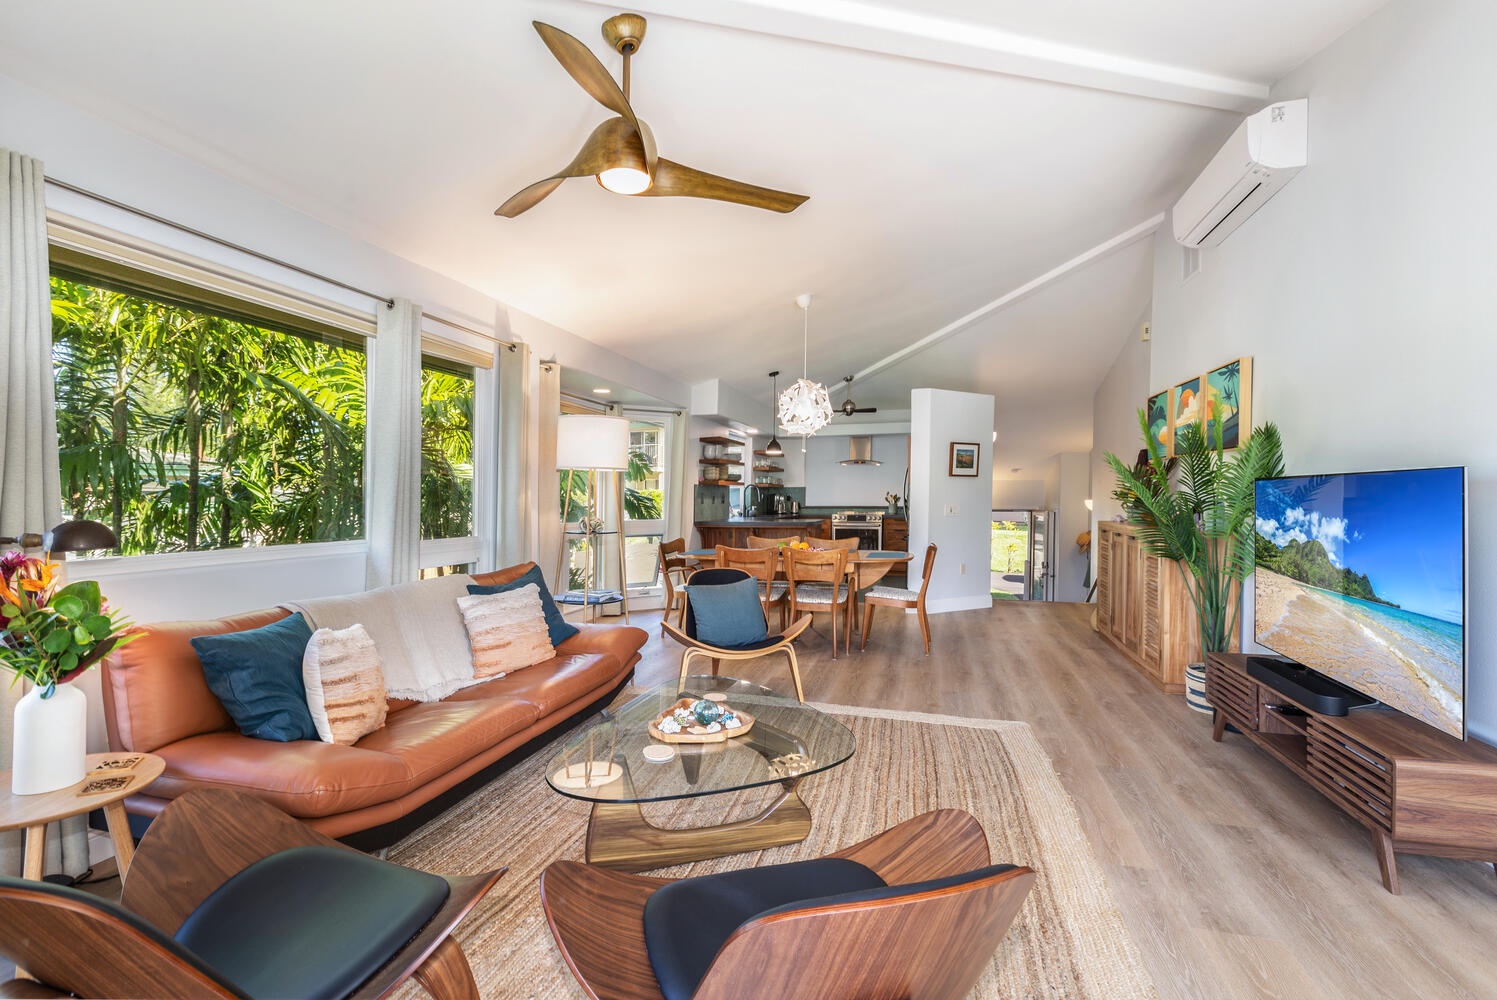 Princeville Vacation Rentals, Sea Glass - A chic and modern-styled home.